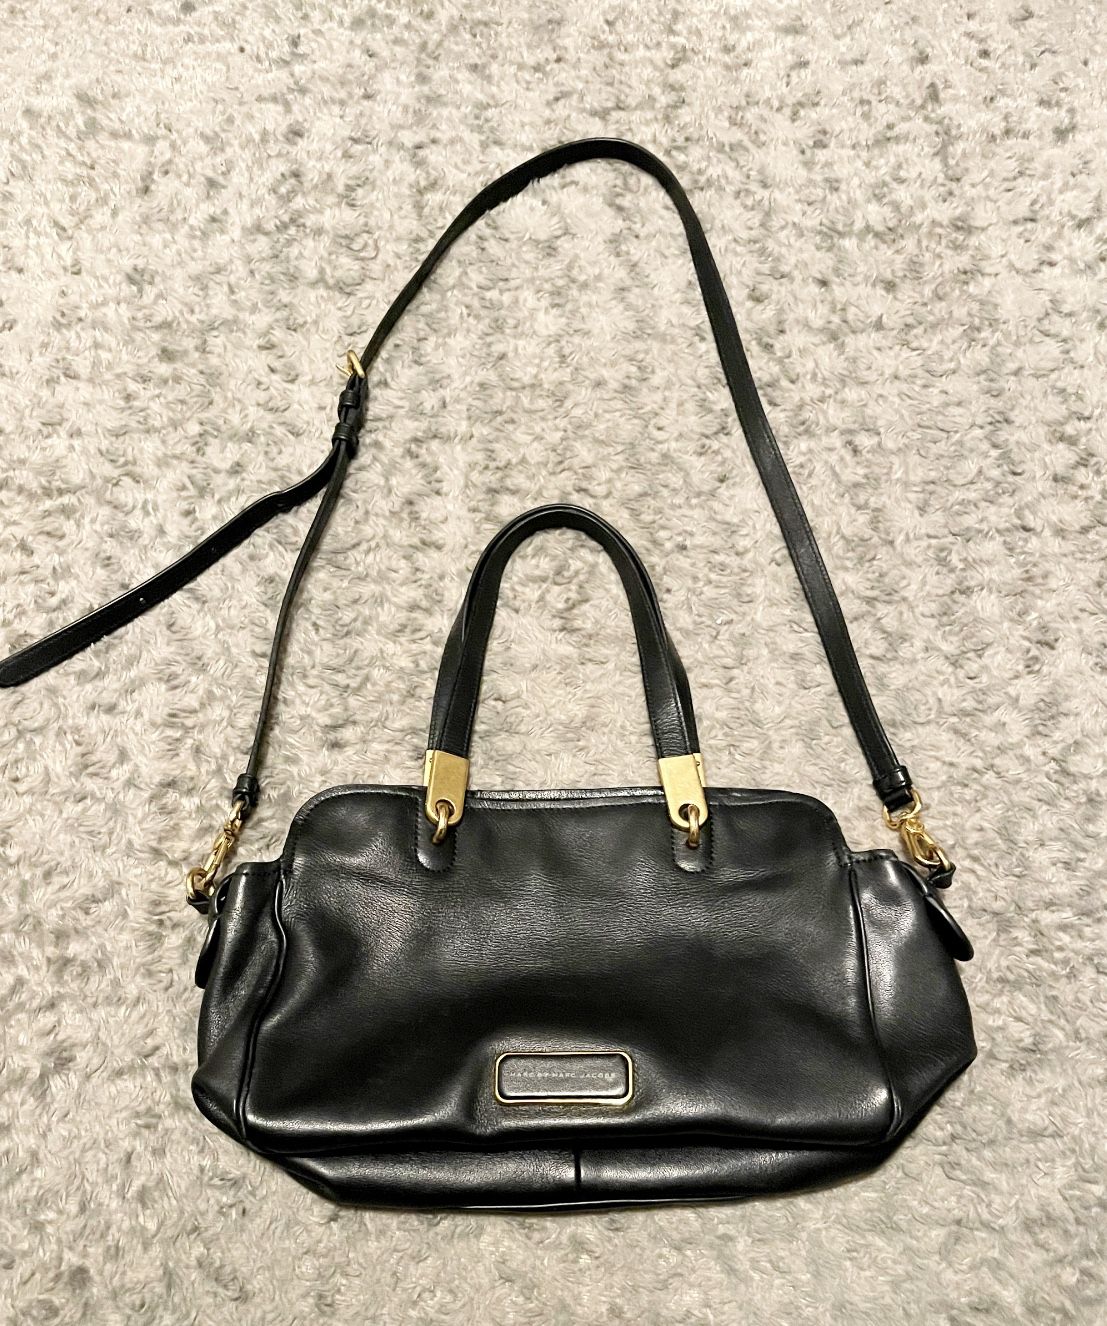 Marc by Marc Jacobs shoulder bag with crossbody strap. Retail $498. Black bag with gold medal details. Adjustable strap. Great condition!